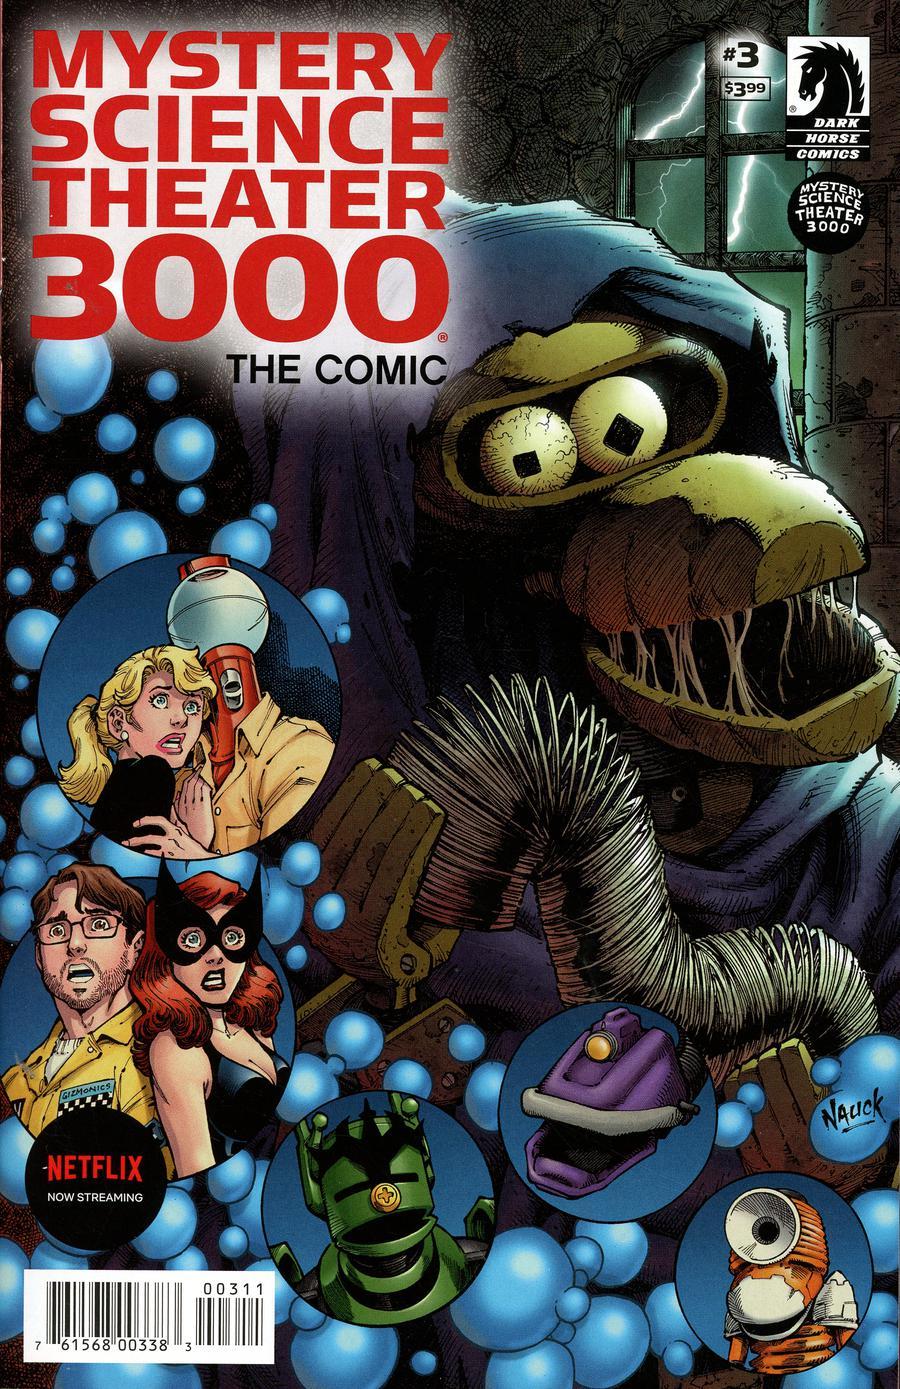 Mystery Science Theater 3000 Vol. 1 #3